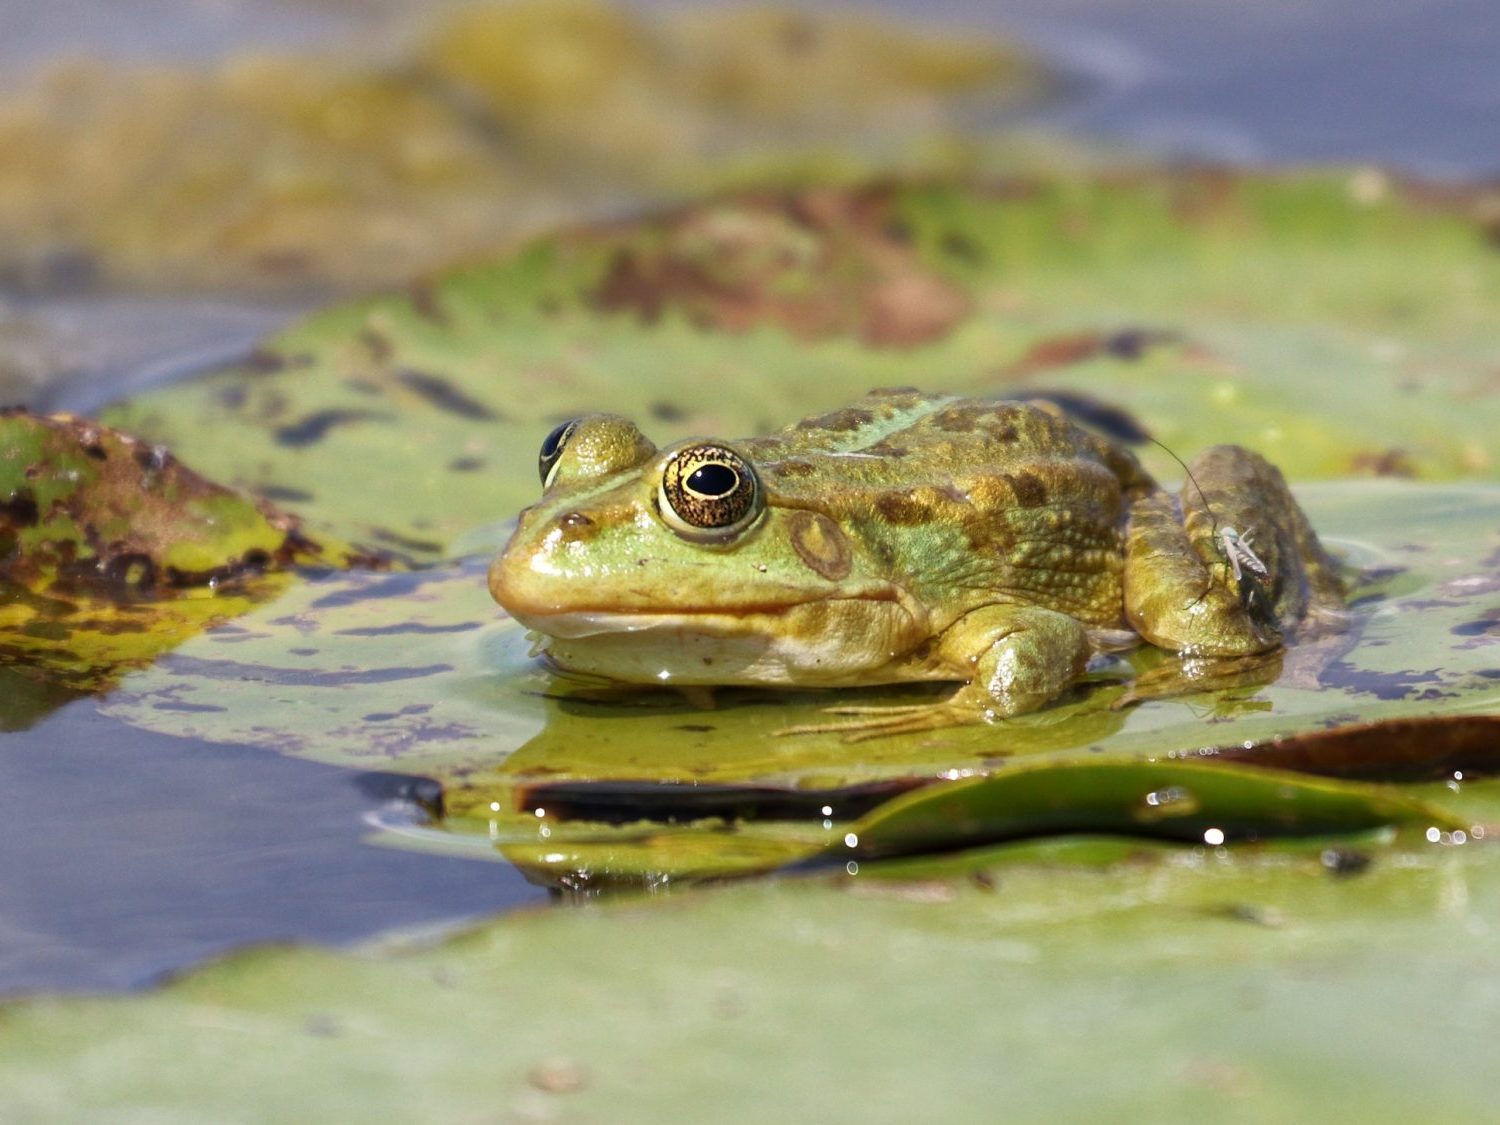 Marsh Frog sitting on a lily pad in the Danube Delta